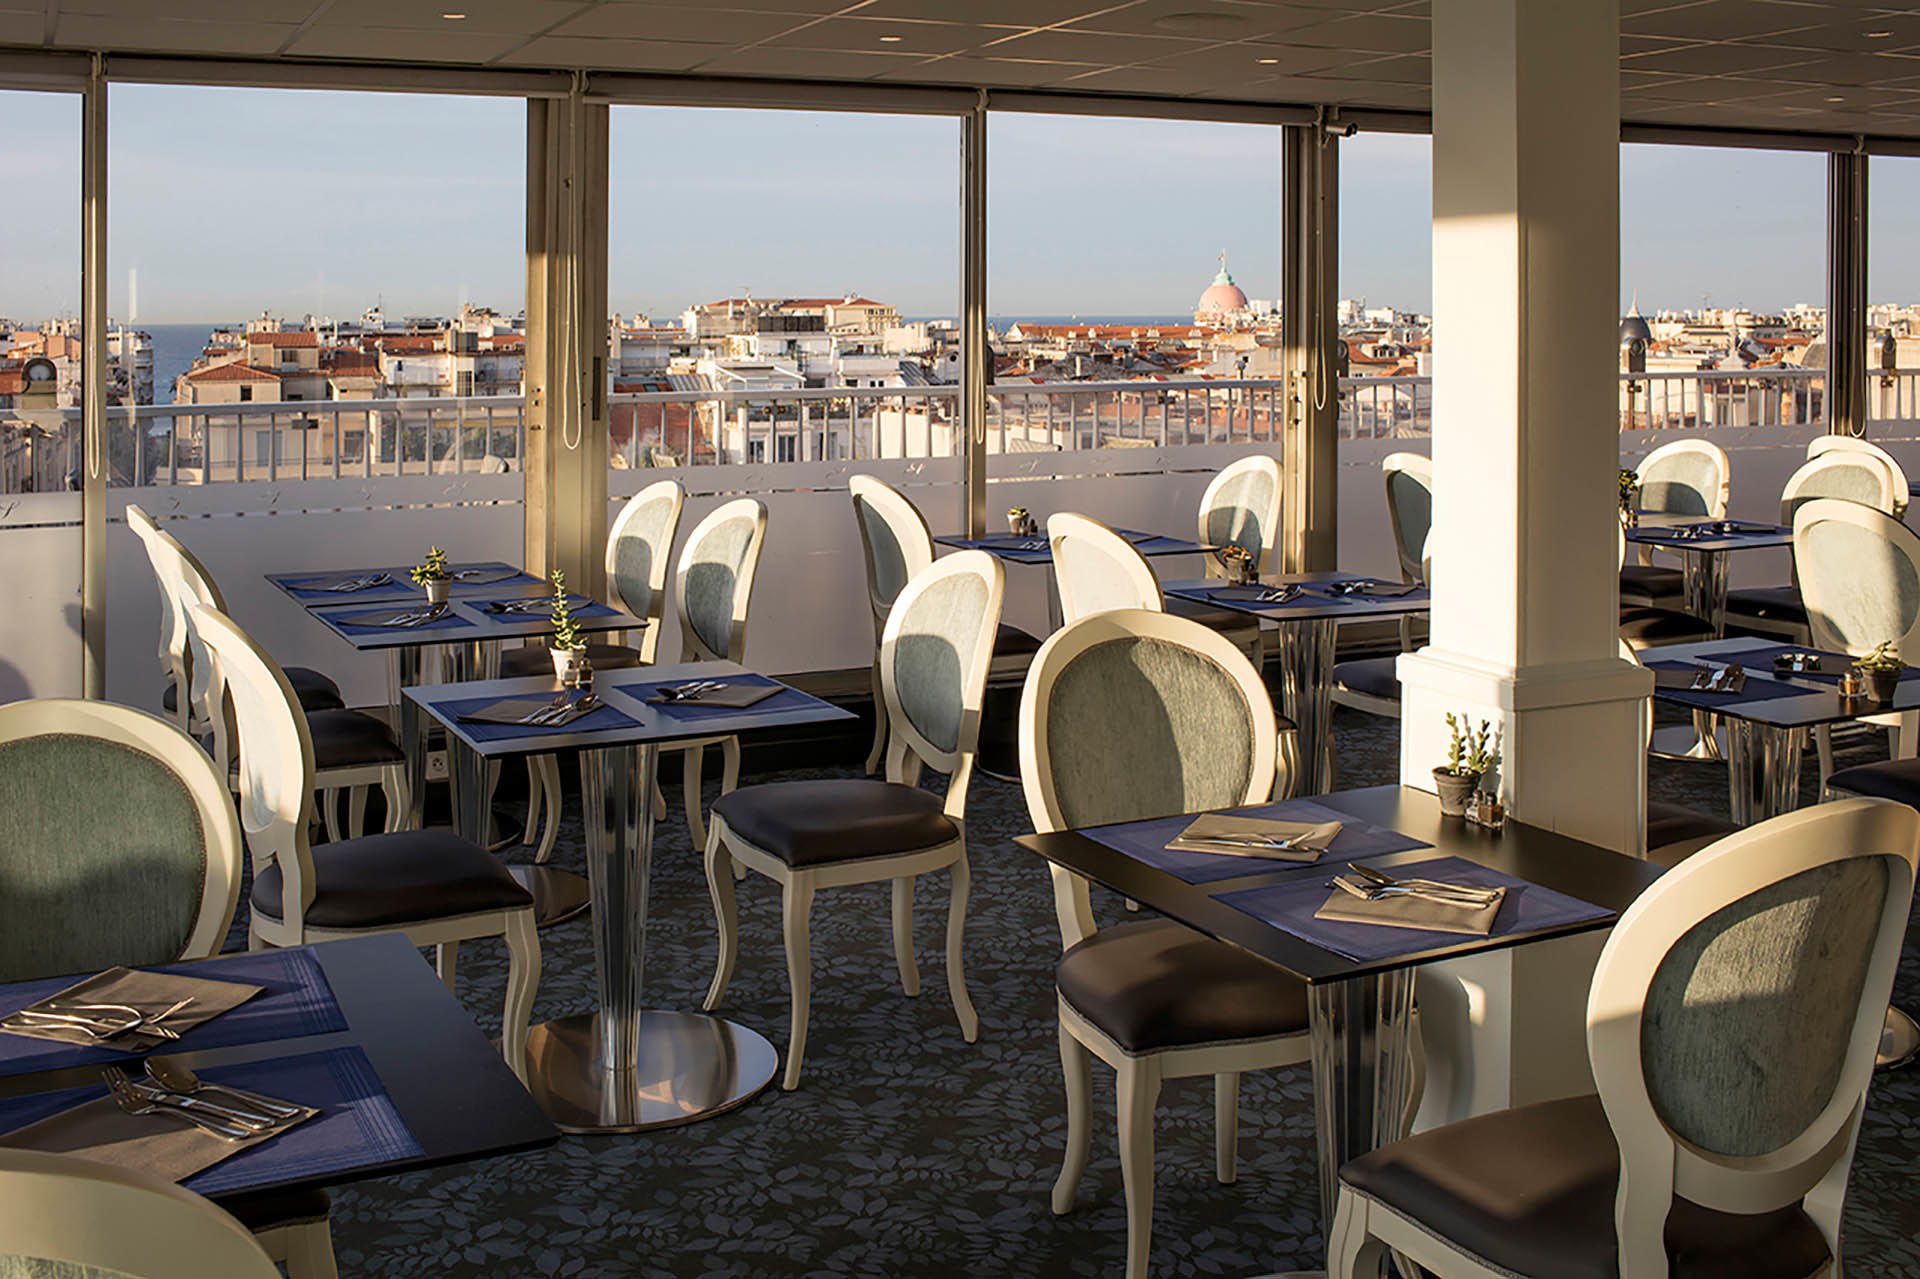 Restaurant with a View in Nice France | Splendid Hotel & Spa